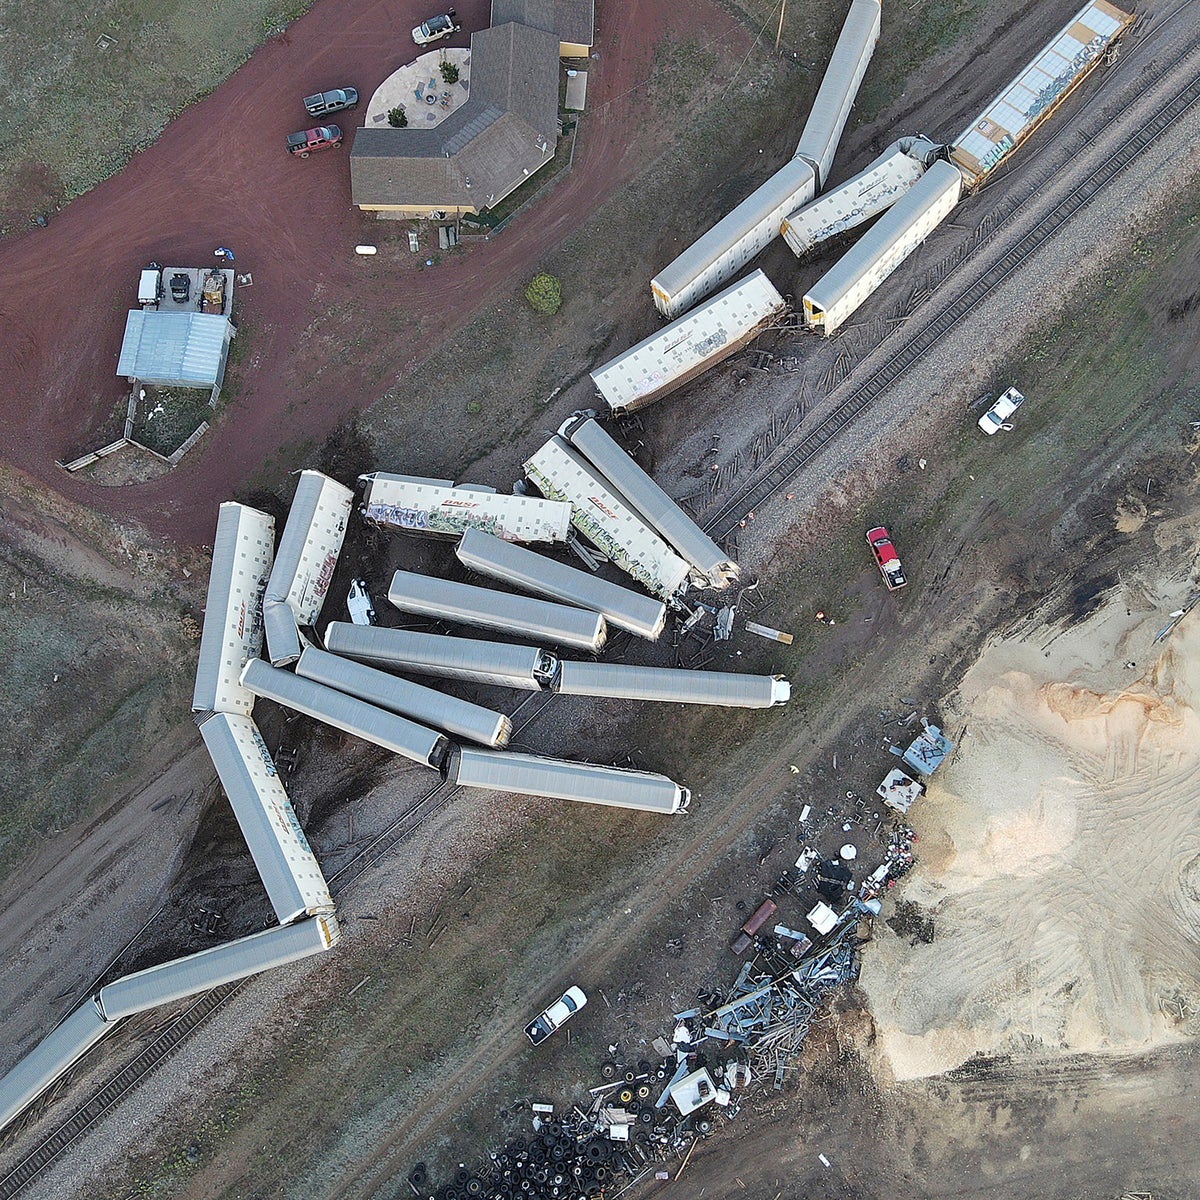 Freight train carrying new vehicles involved in huge derailment in Arizona